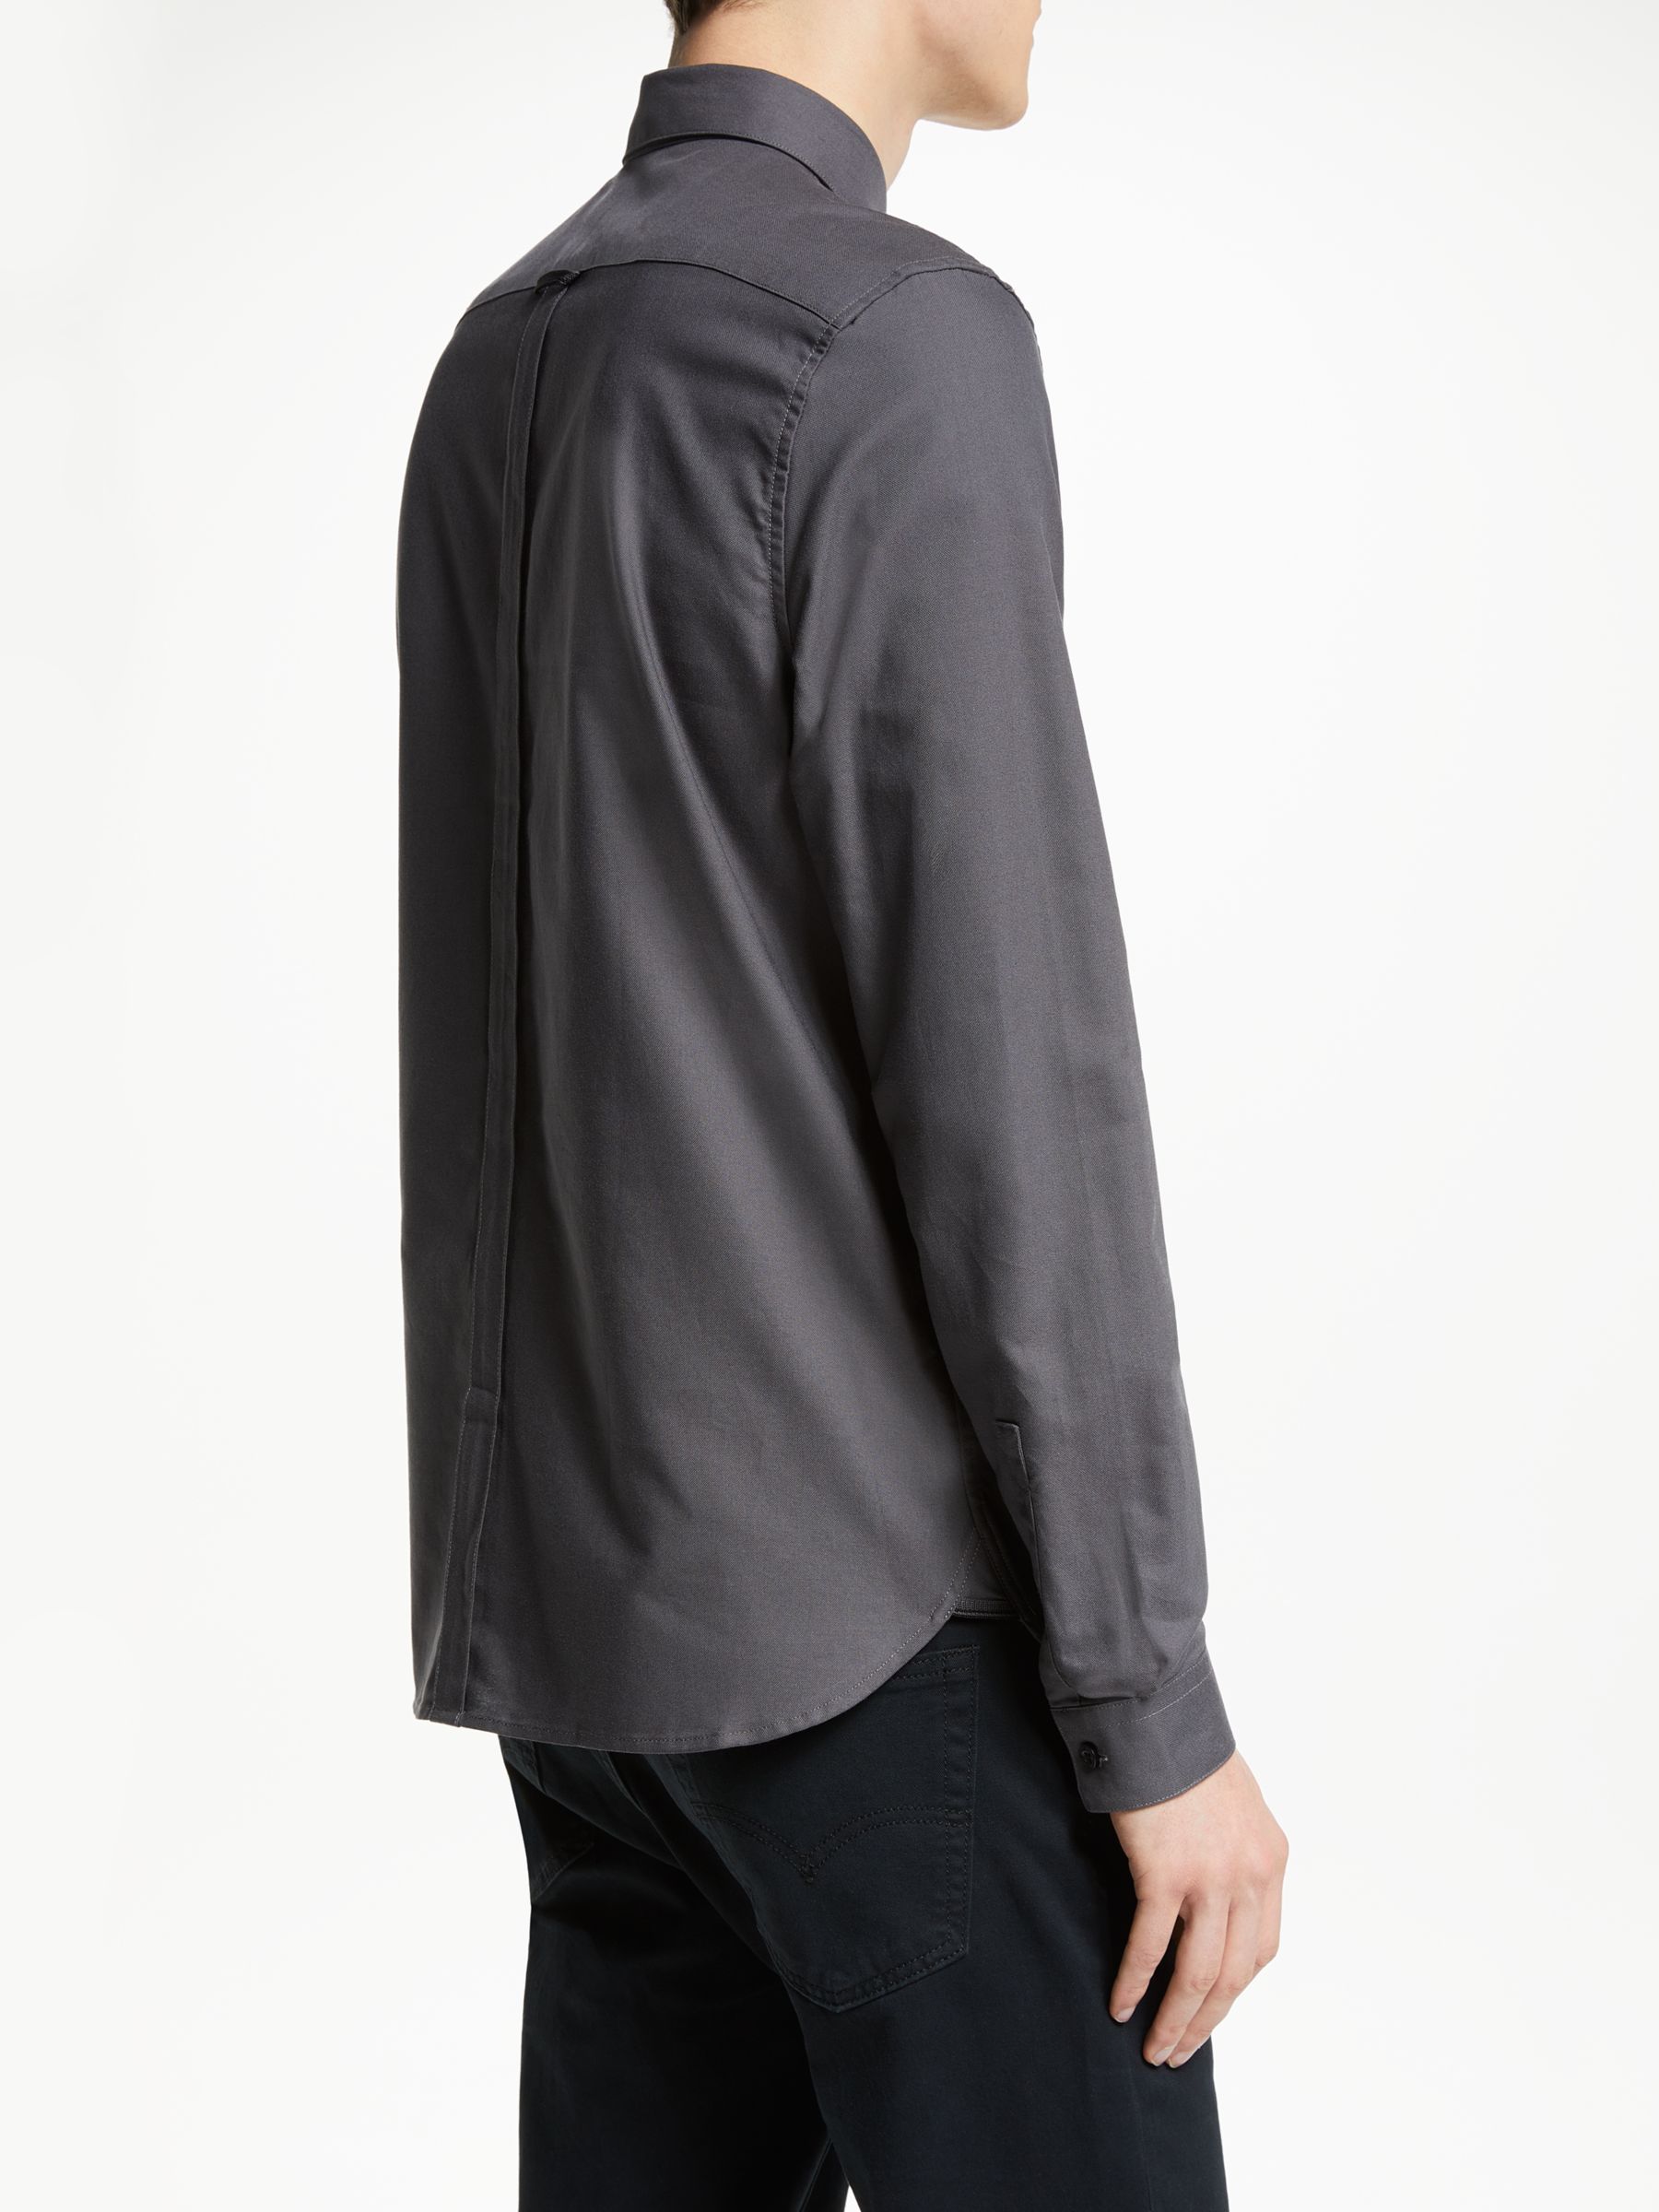 Fred Perry Long Sleeve Classic Oxford Shirt, Gunmetal